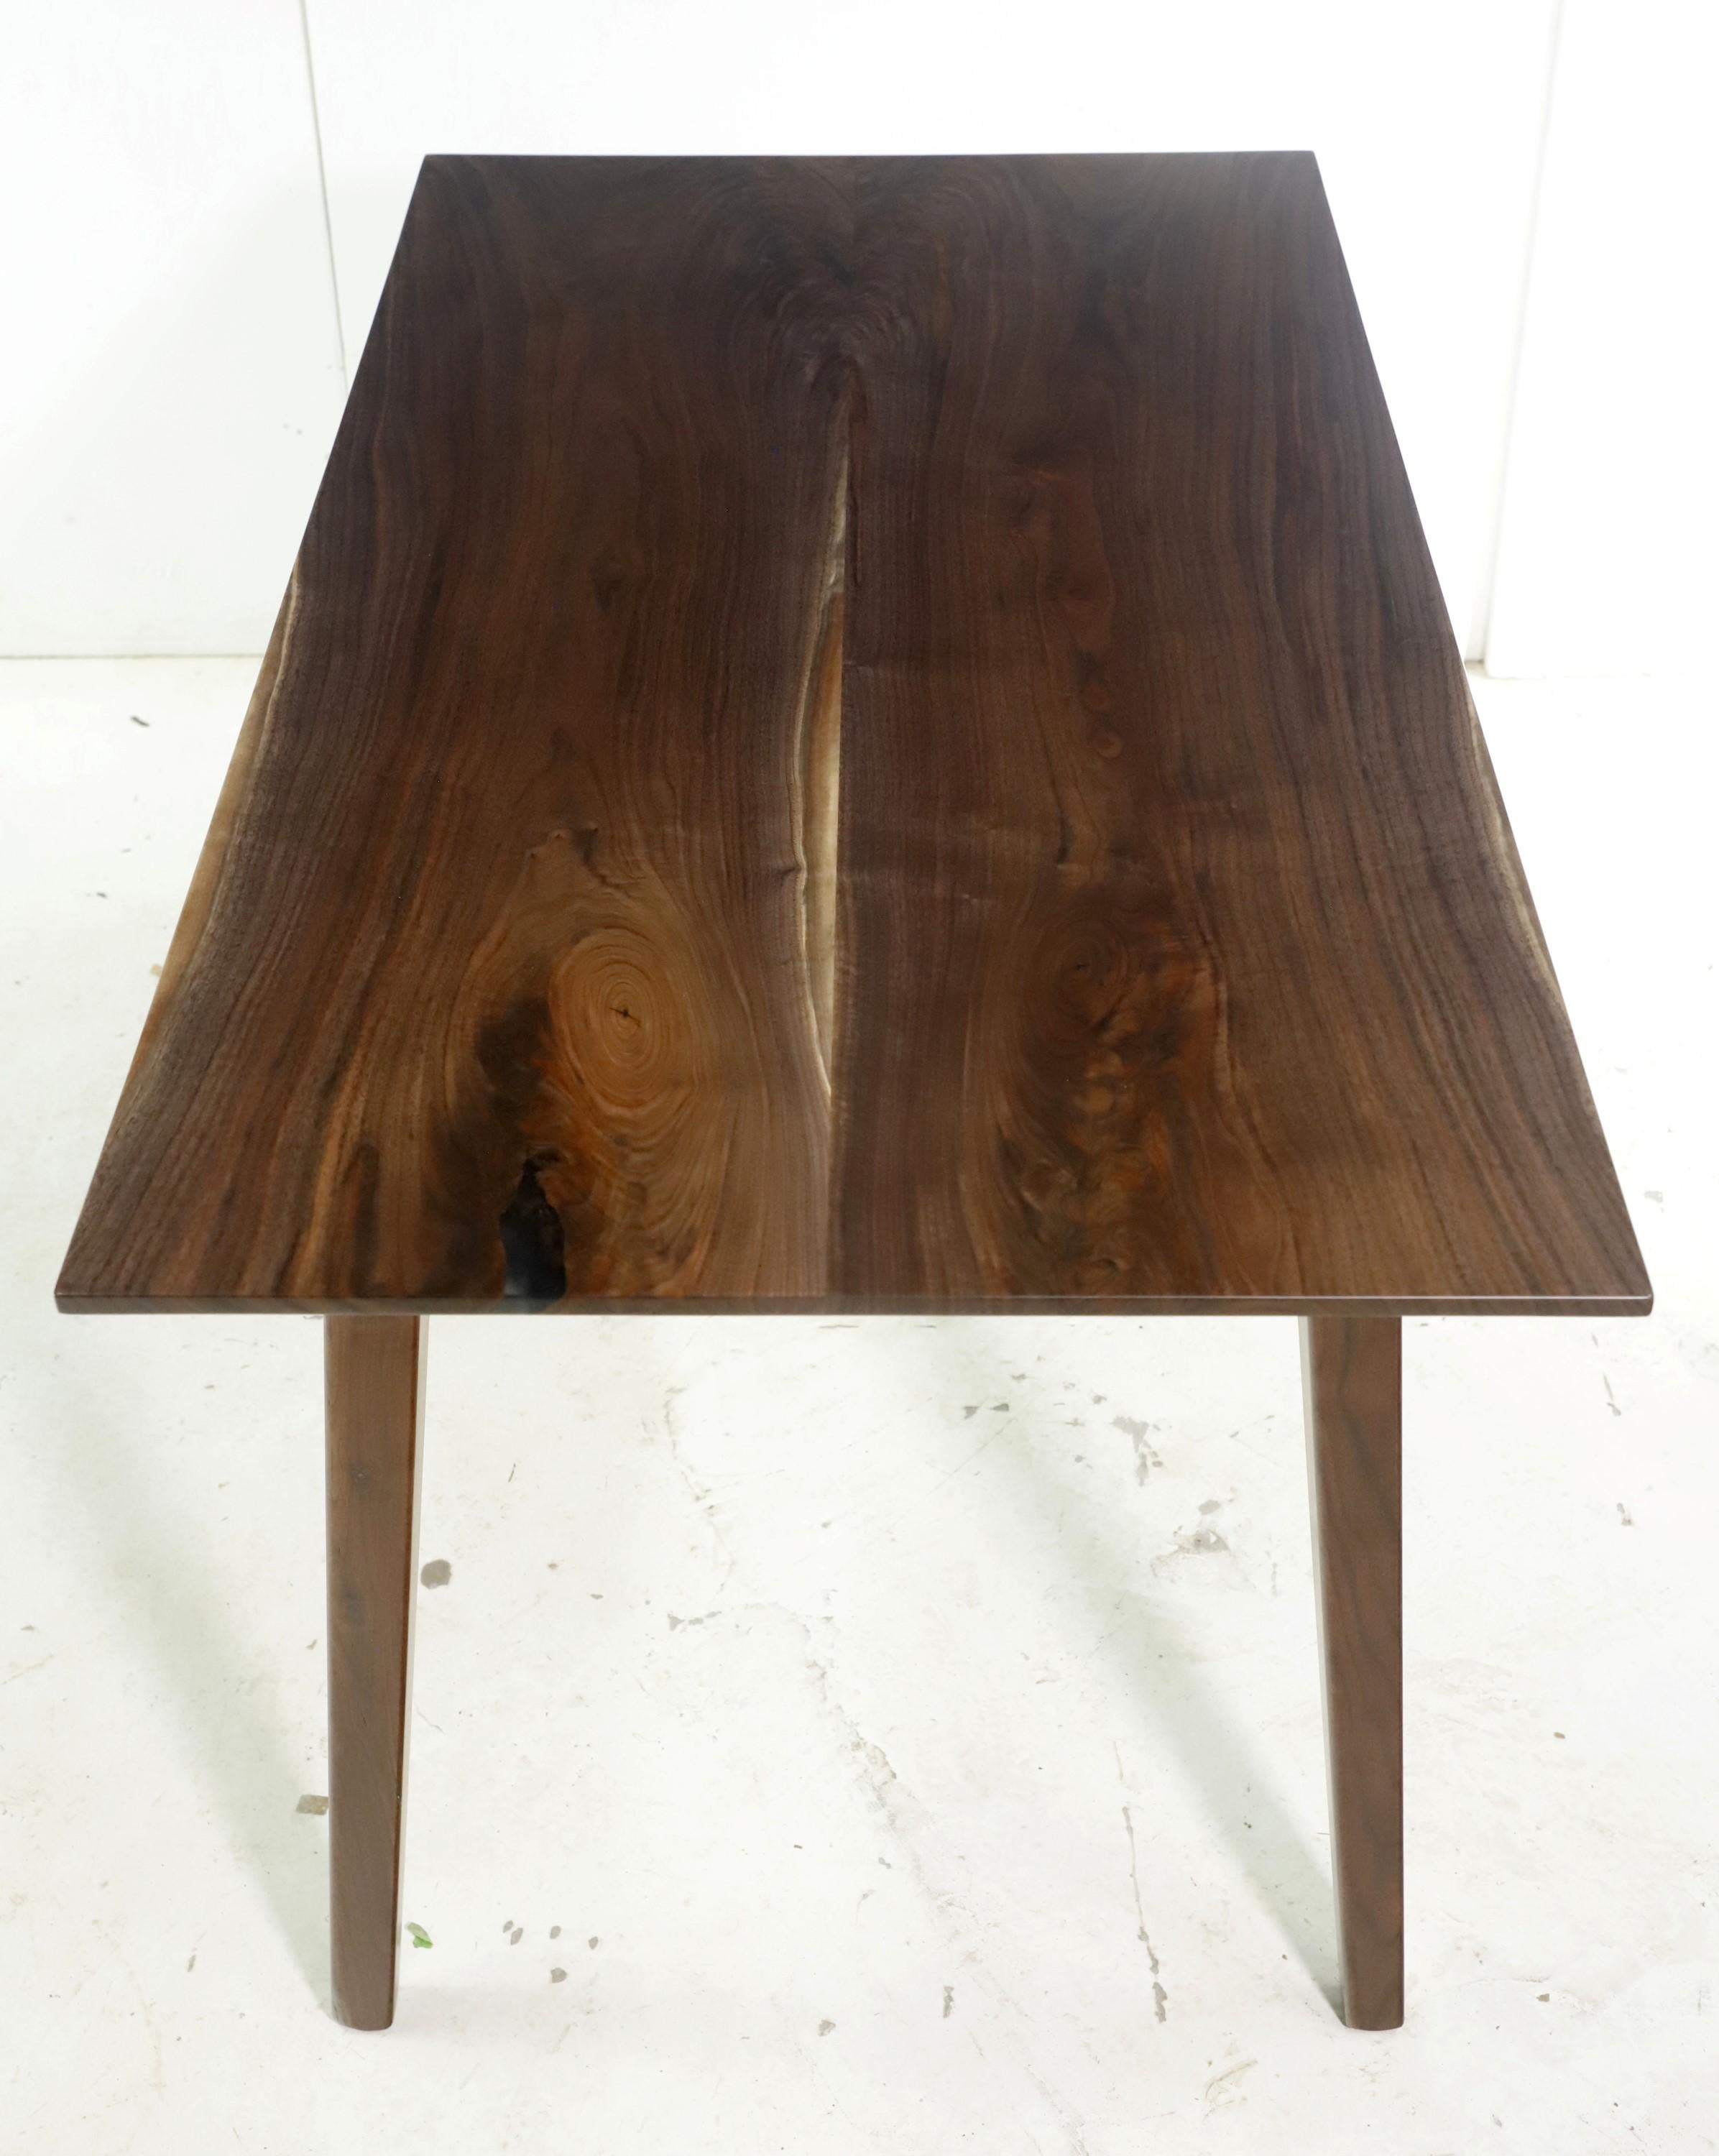 This table features a two slab solid walnut top with subtle small clear resin details pours down the center paired with tapered legs. This table is ready to ship. Please note, this item is located in our Scranton, PA location.